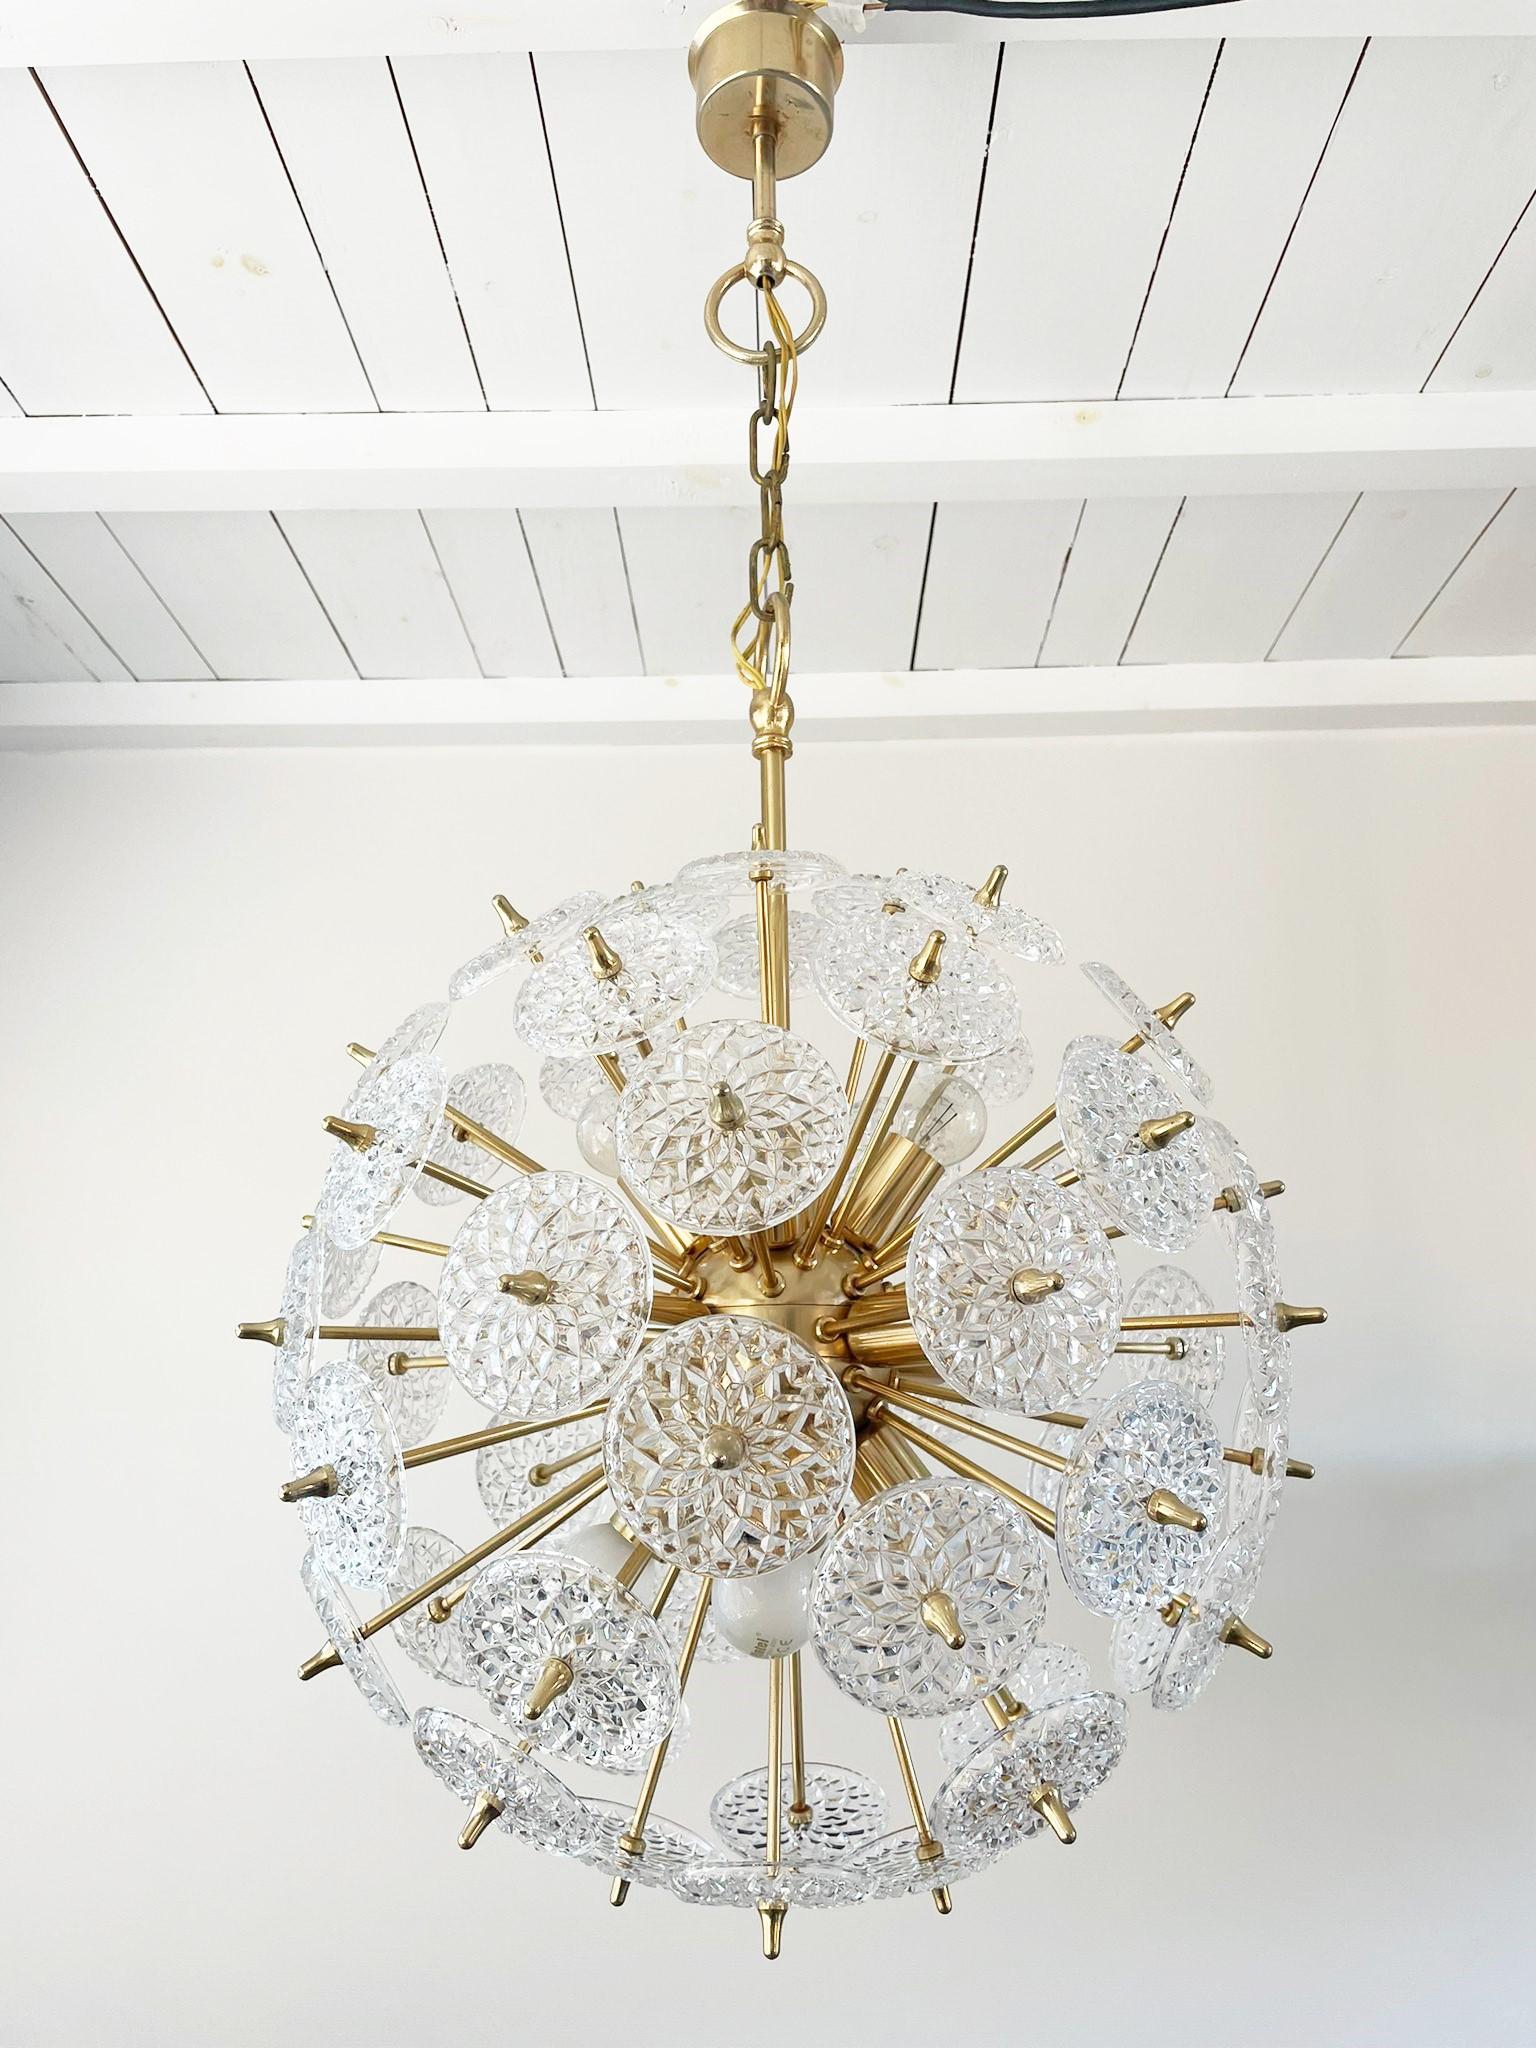 Impressive brass and crystal sputnik chandelier.

The crystals are made by the renowned belgium glass company Val Saint Lambert.

The chandelier has 12 lightpoints that can be used with regular E14 candle light bulbs.

These chandeliers are